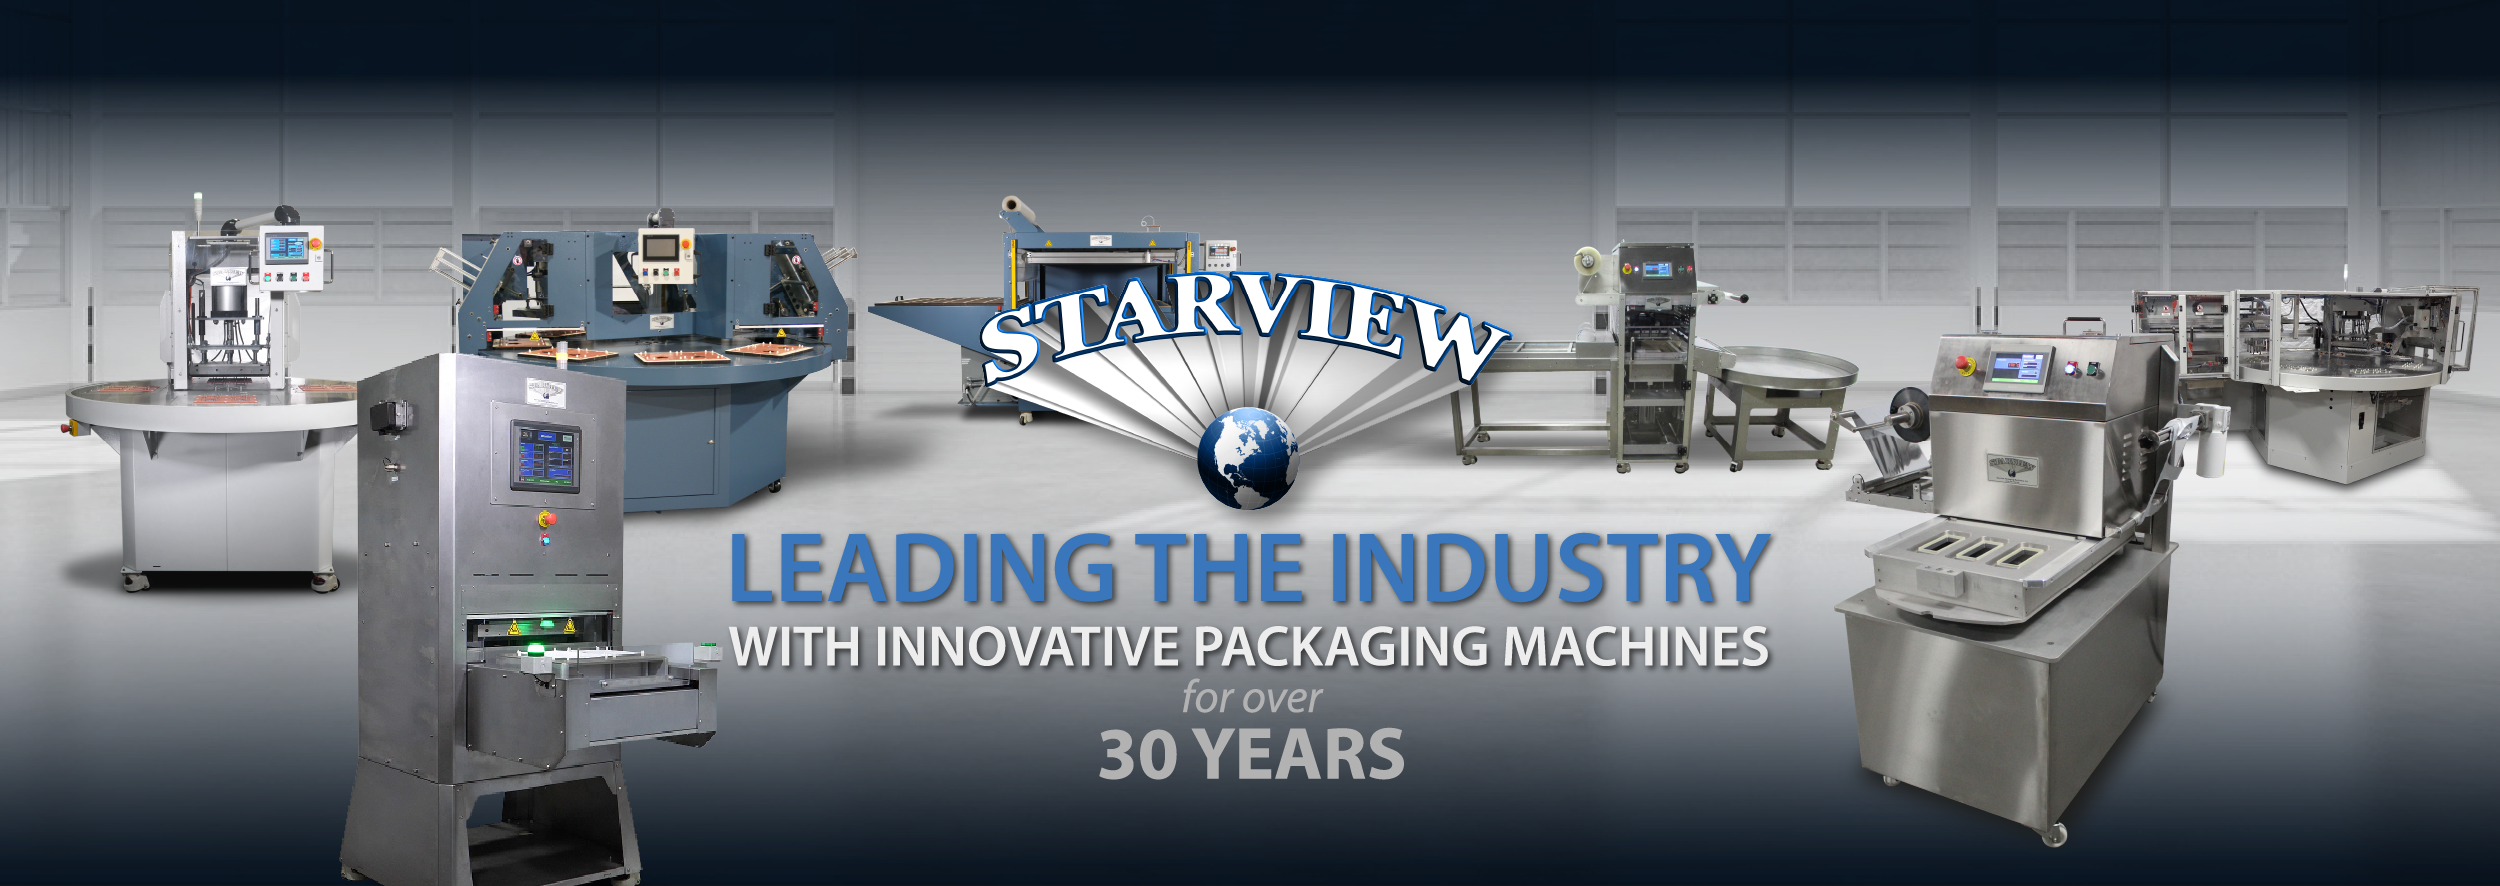 Staview innovative packaging machinery